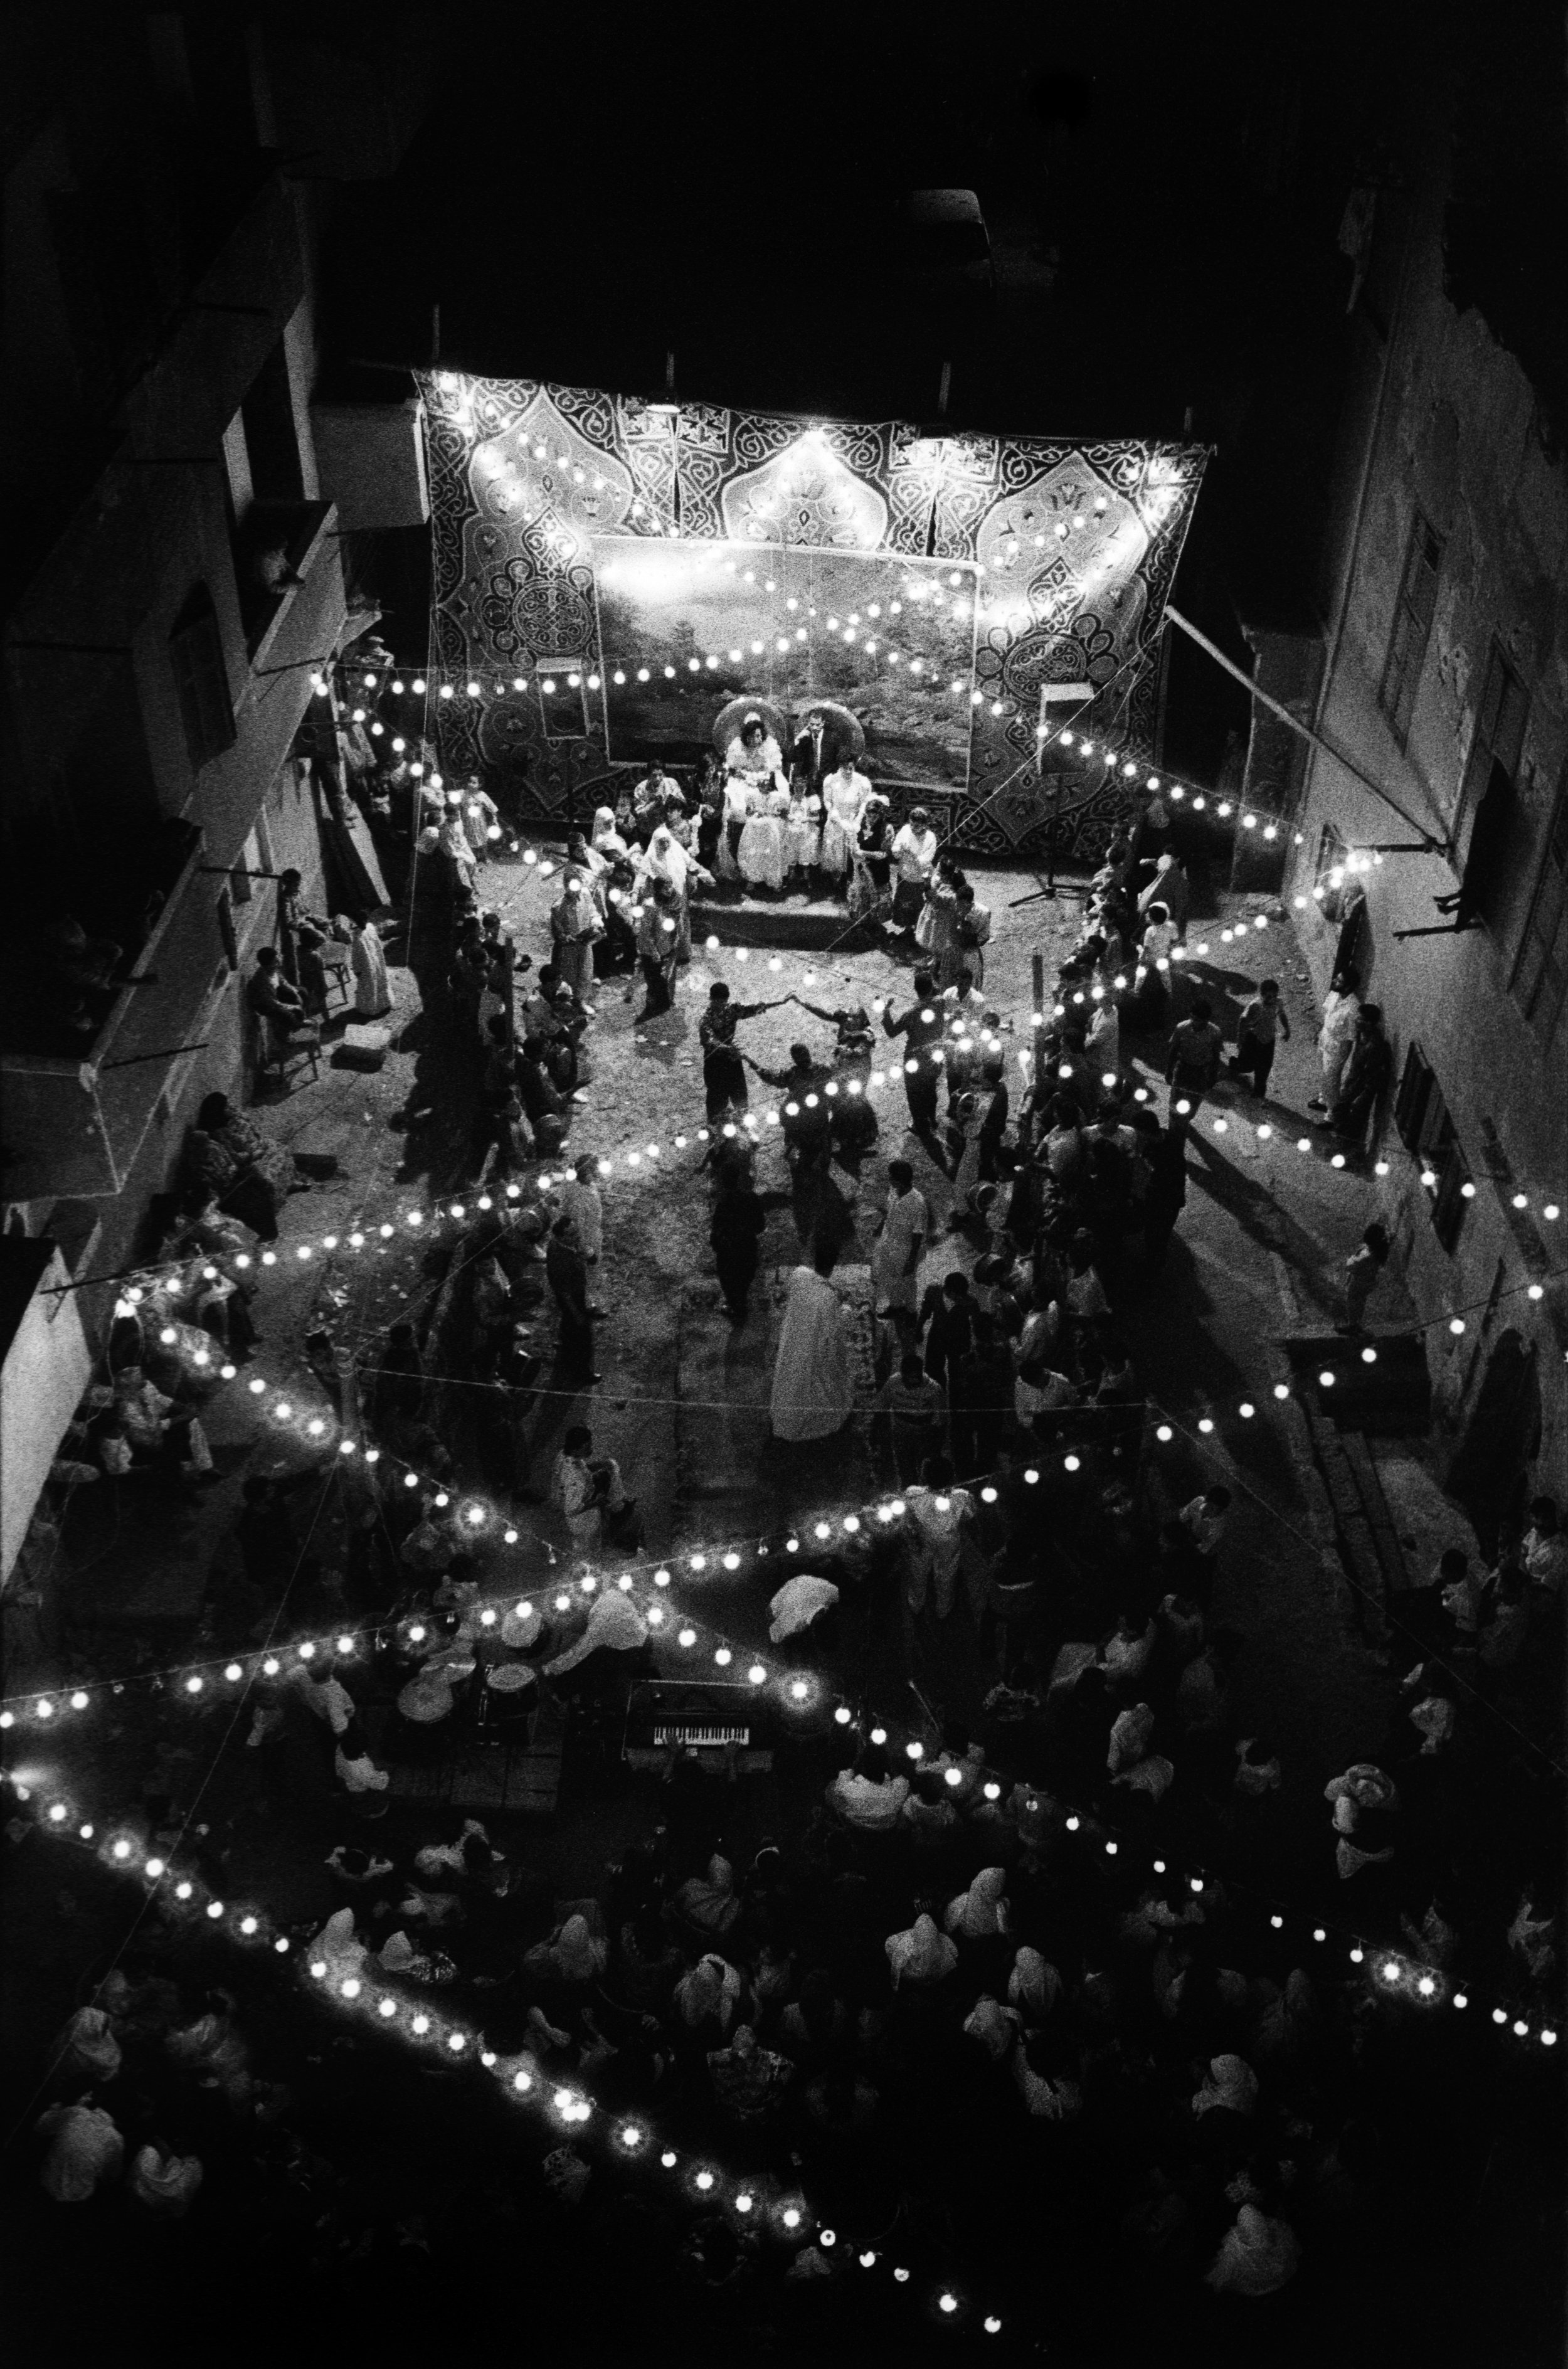  An overview of an evening wedding ceremony in the street between mausoleums. 